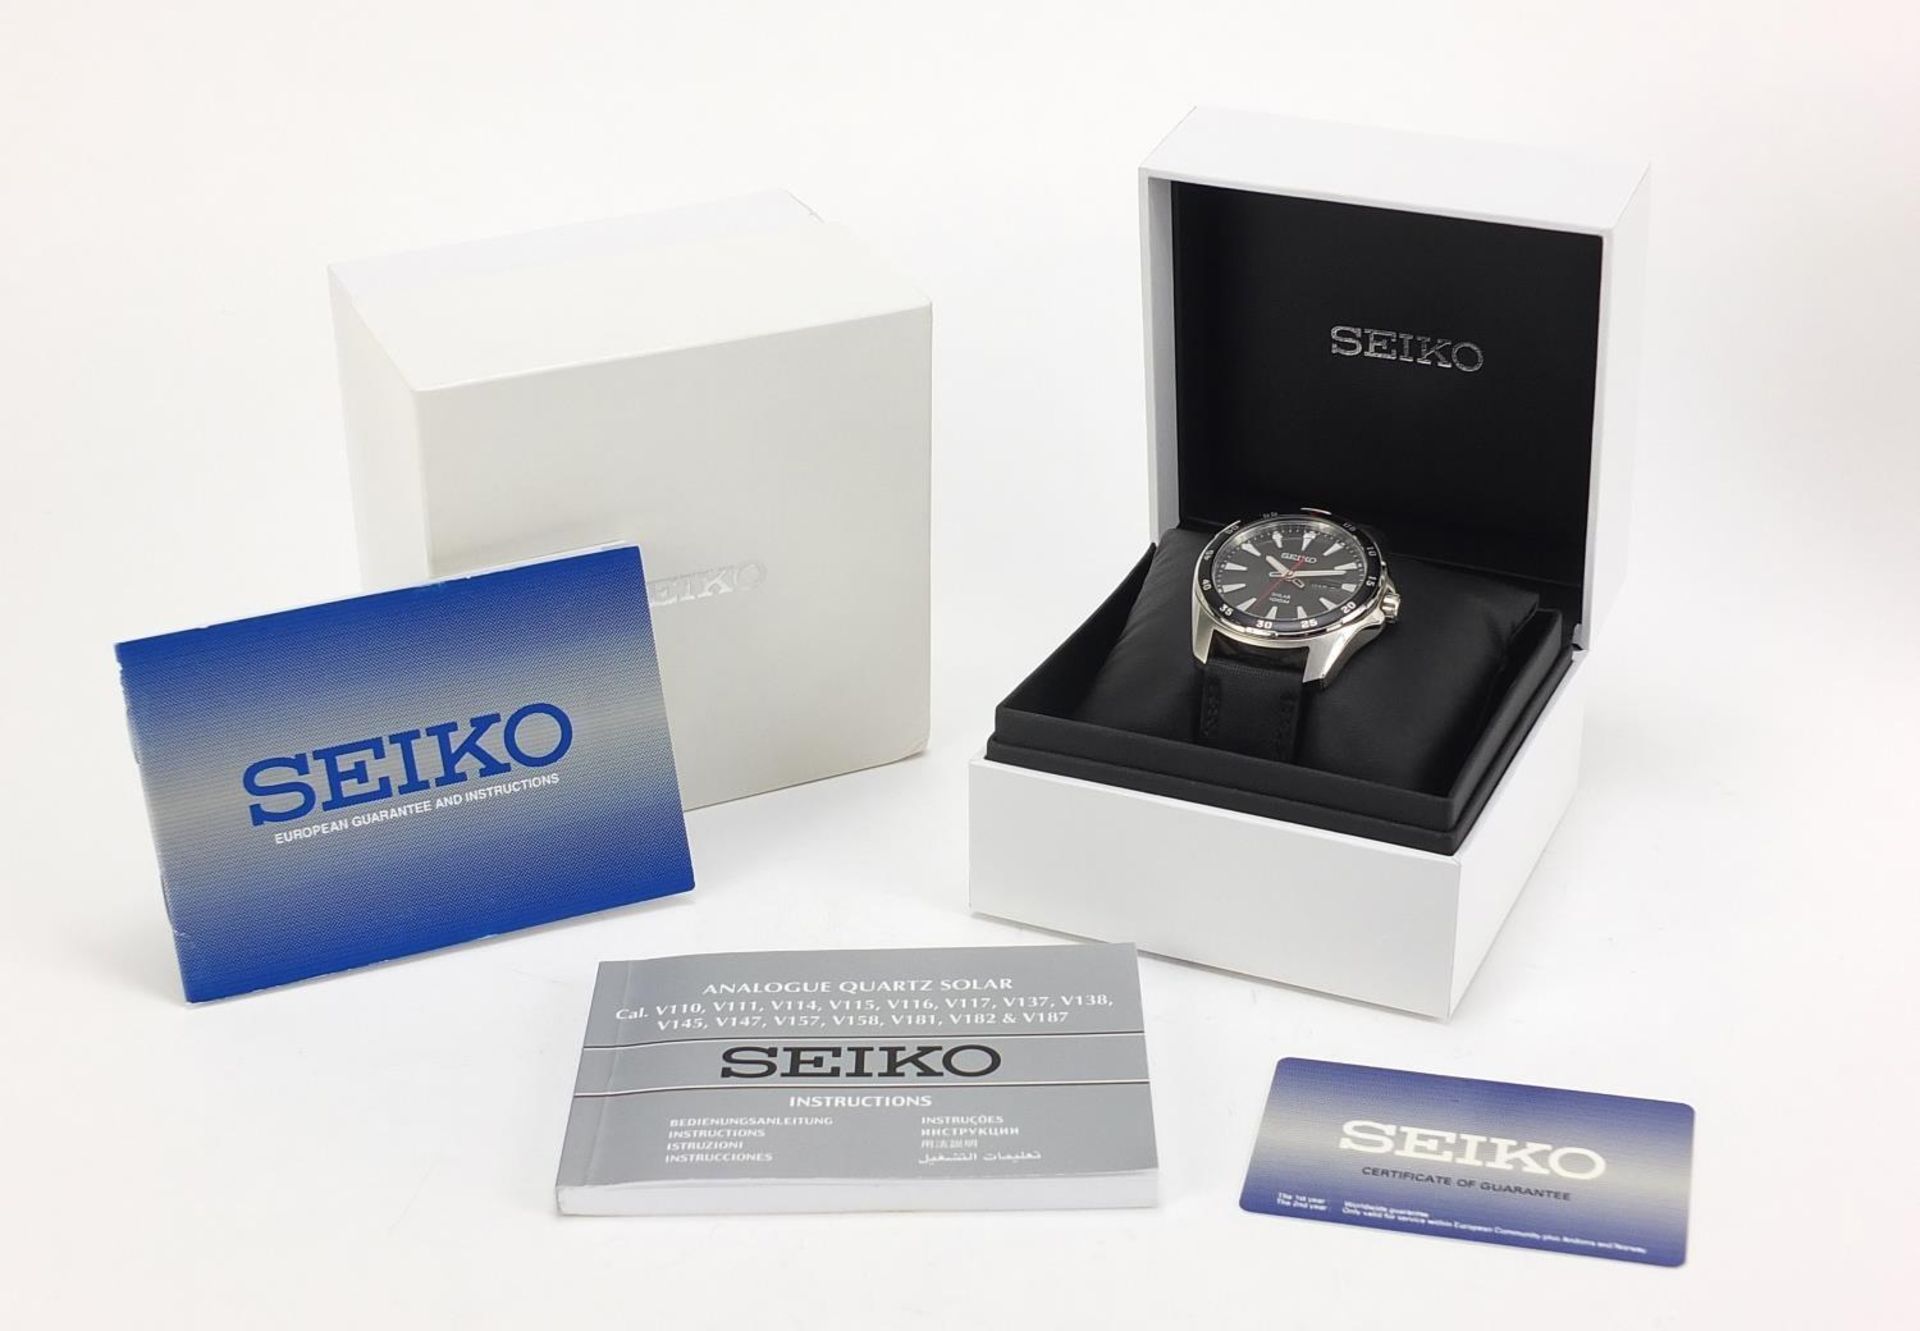 Seiko Solar, gentlemen's 100m diver's quartz wristwatch with day/date aperture, V158-0AYO with box - Image 7 of 8